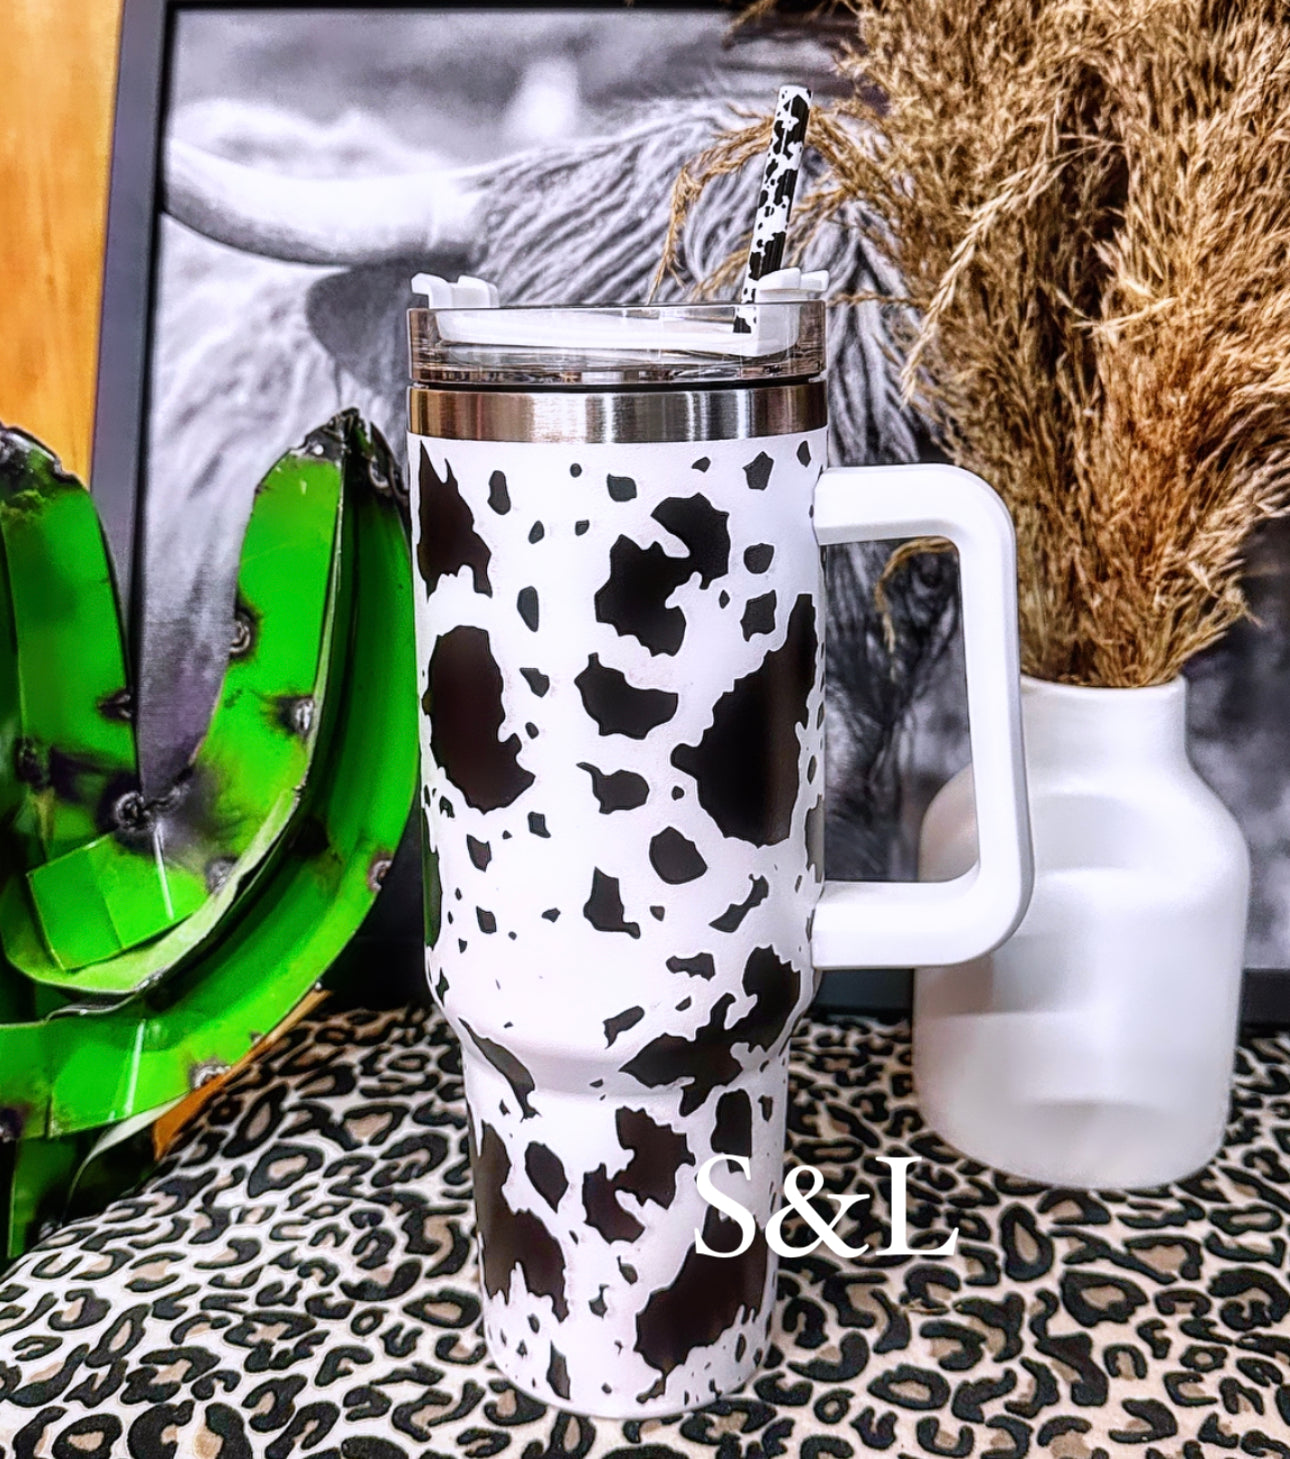 12” Cow print straws (will arrive mid may)